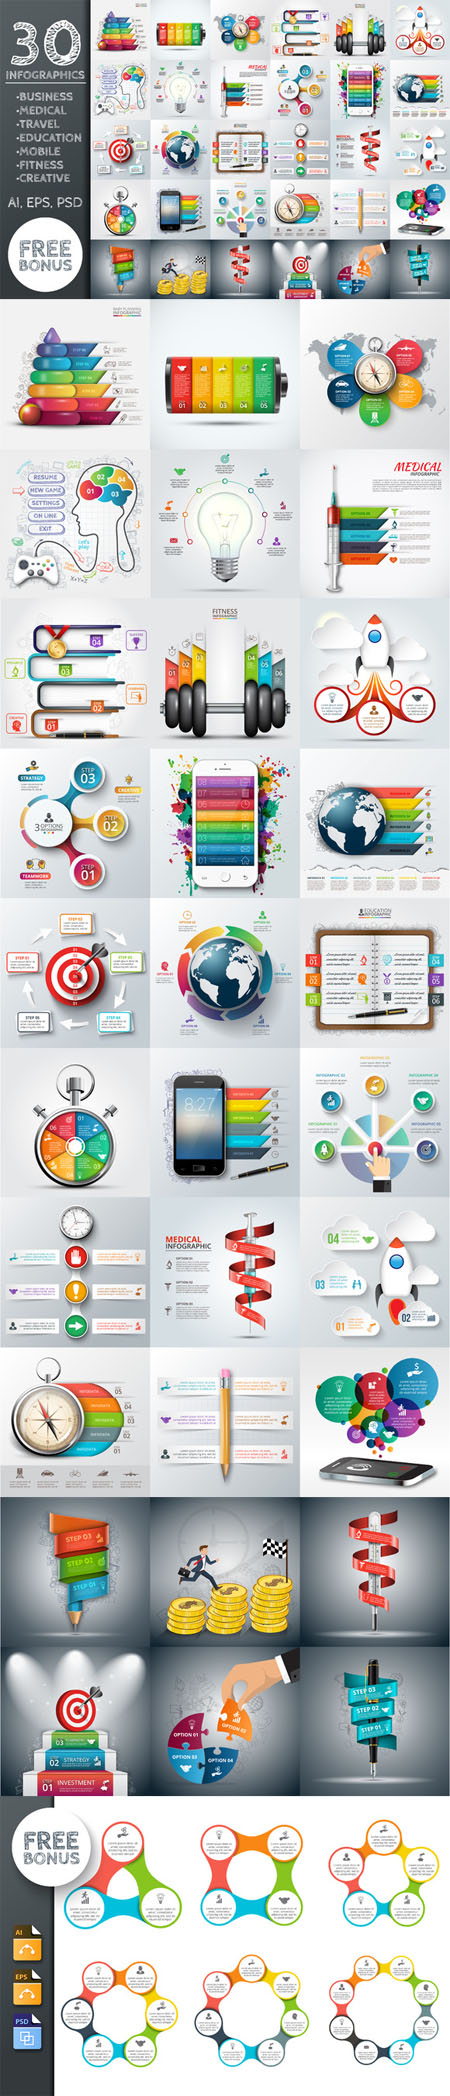 CM - 30 business infographic templates 520231